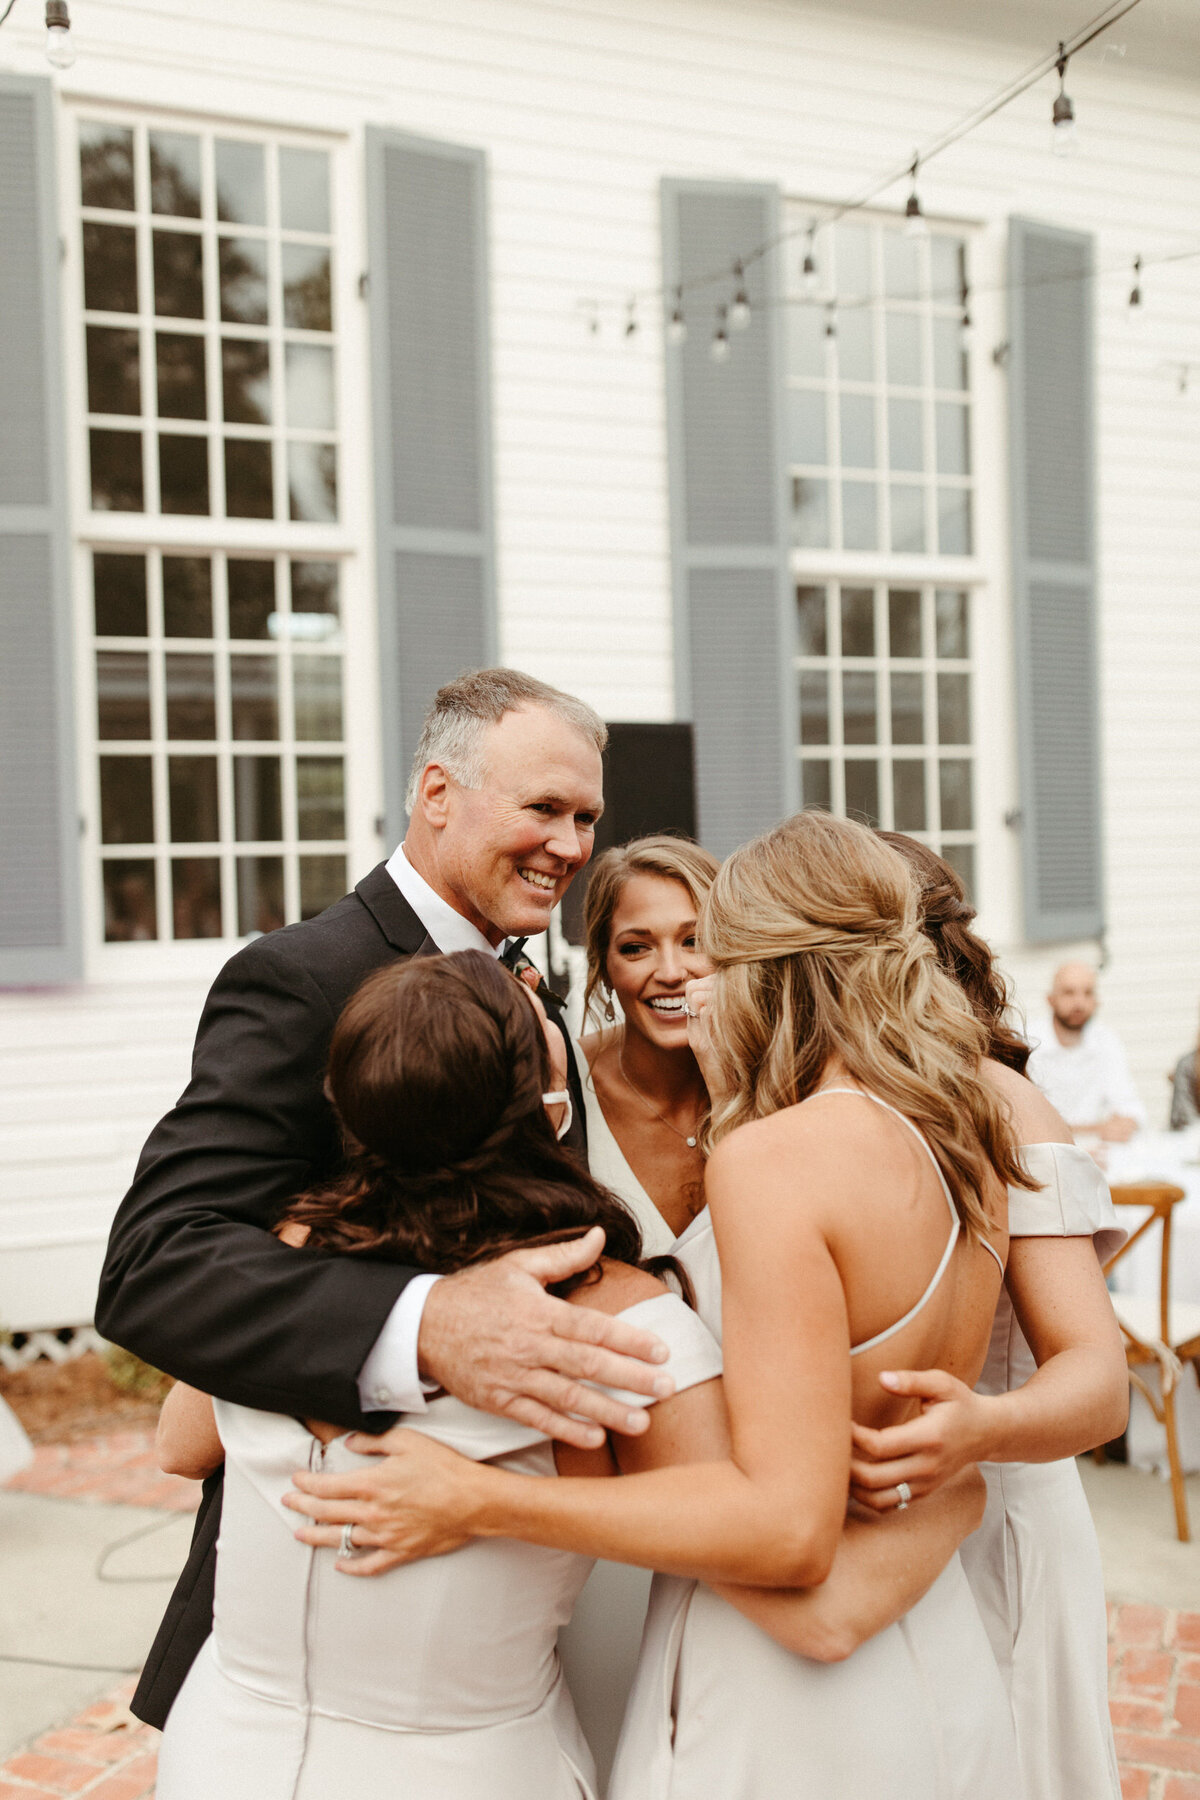 Sweet family moment of a bride dancing with her parents and sisters